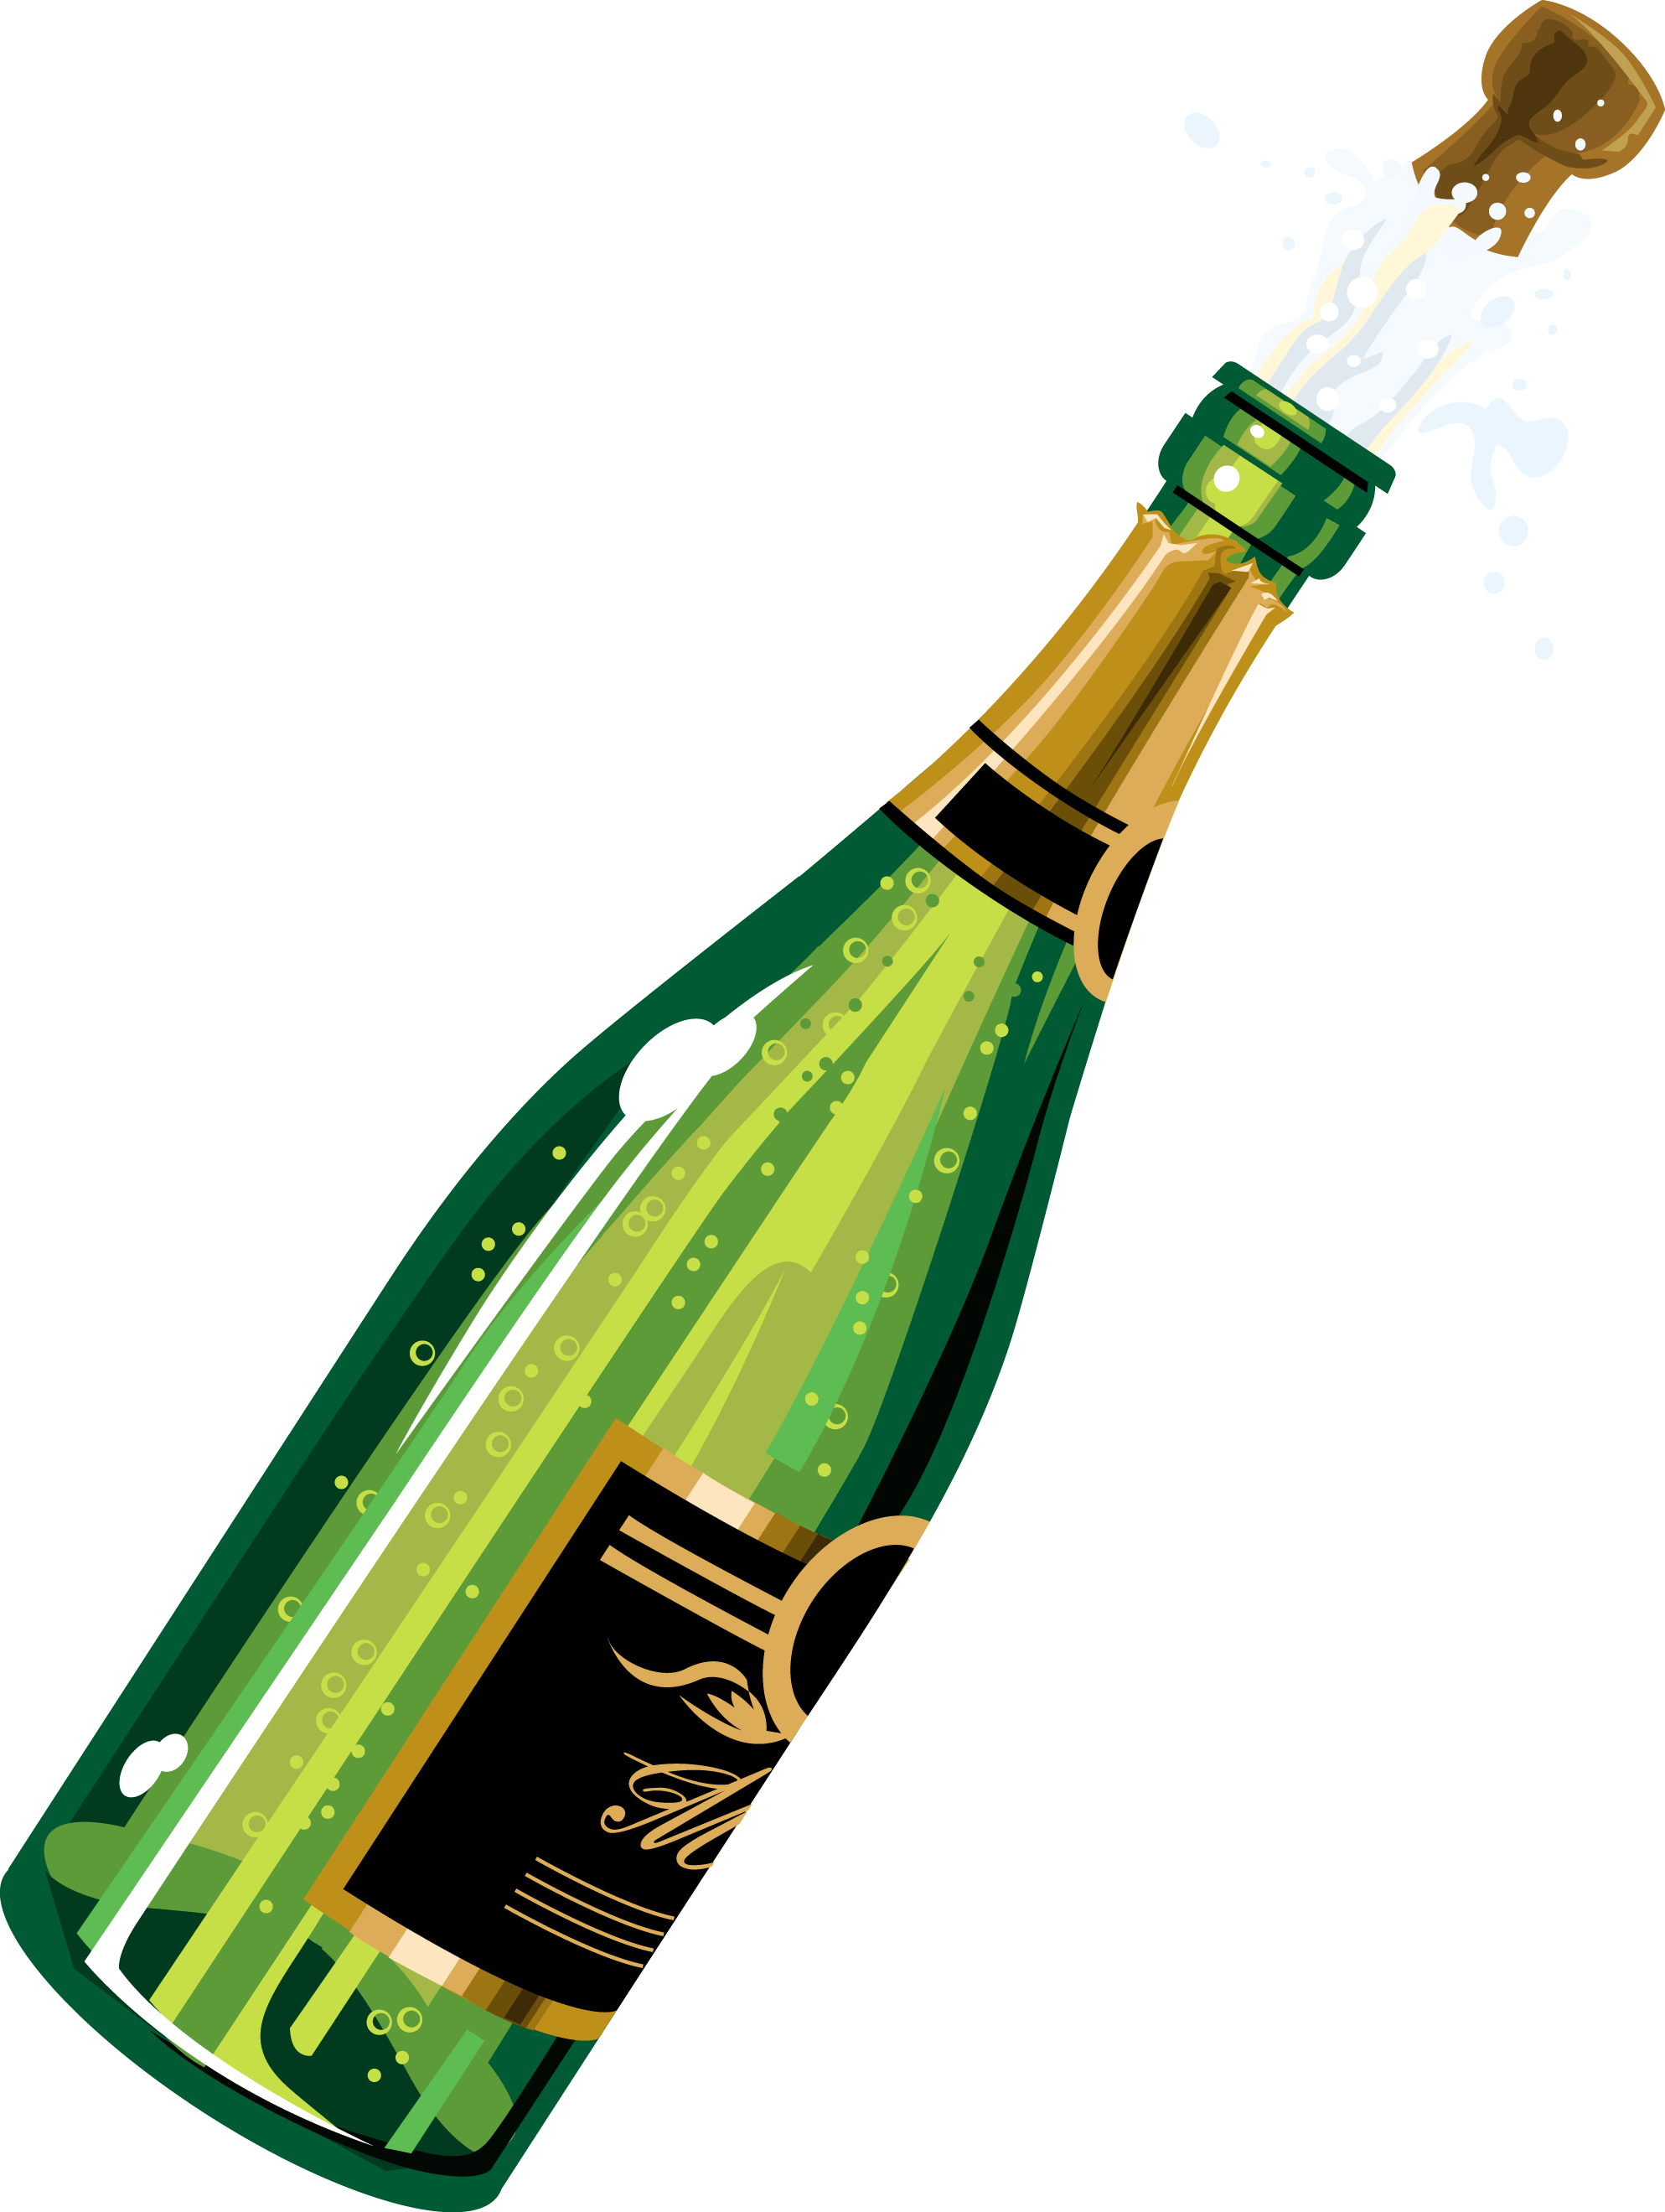 Champagne bottles clipart 20 free Cliparts | Download ...